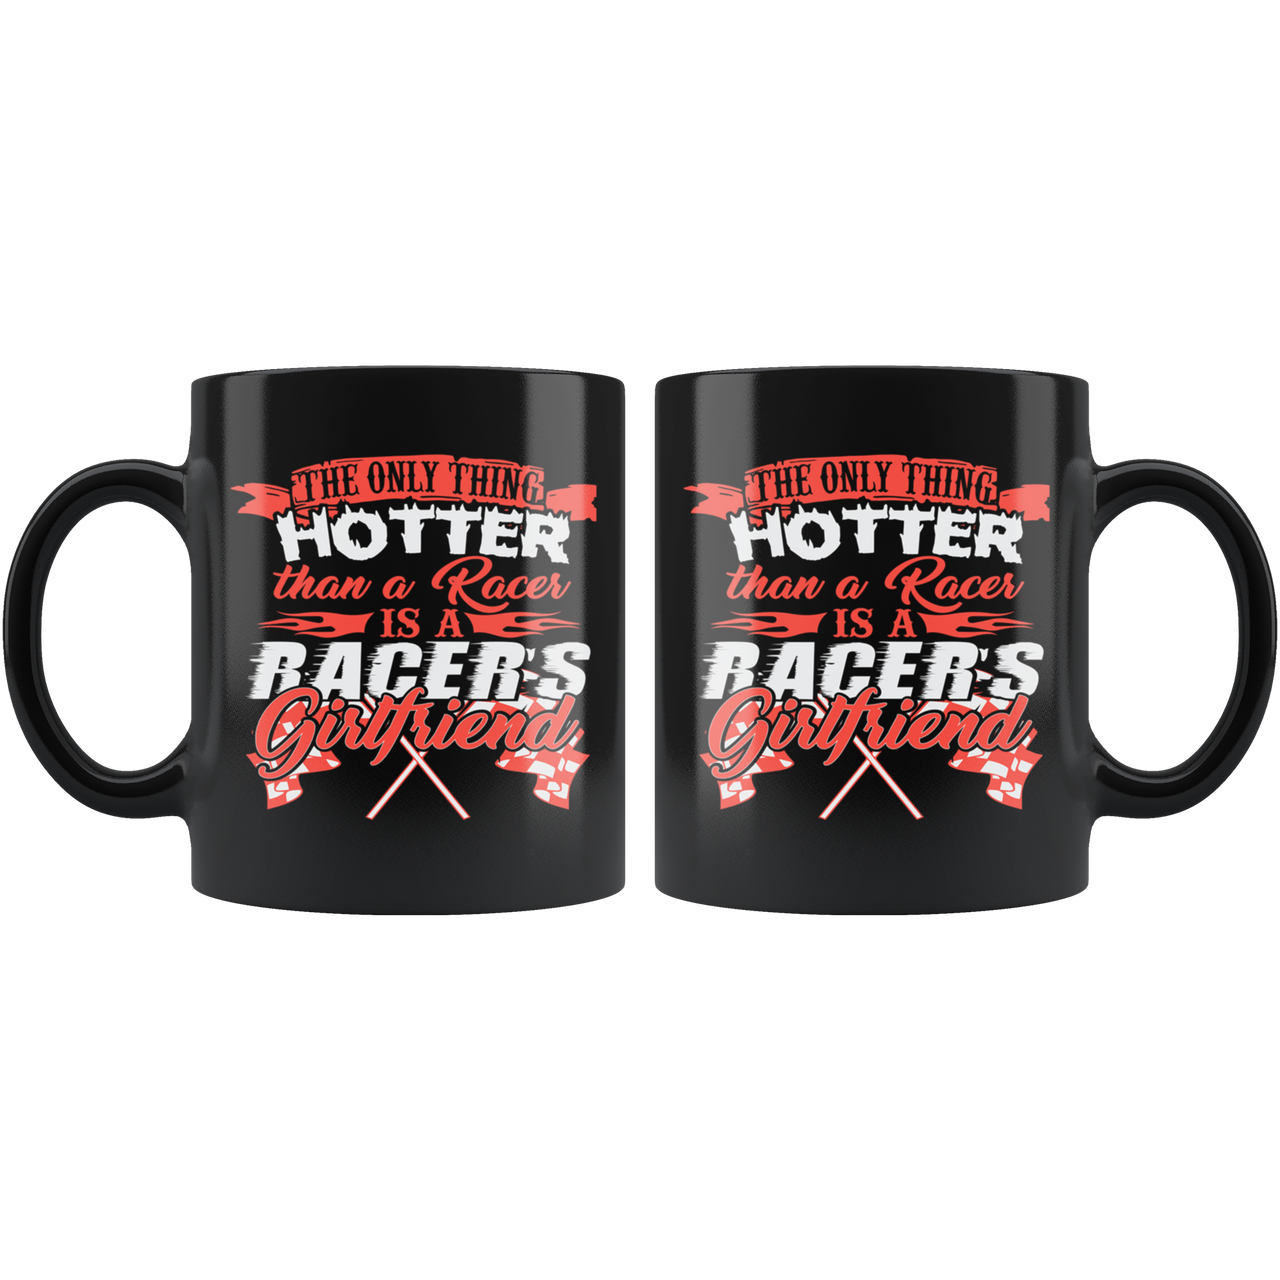 The Only Thing That Hotter than A Racer Is A Racer's Girlfriend Mug!